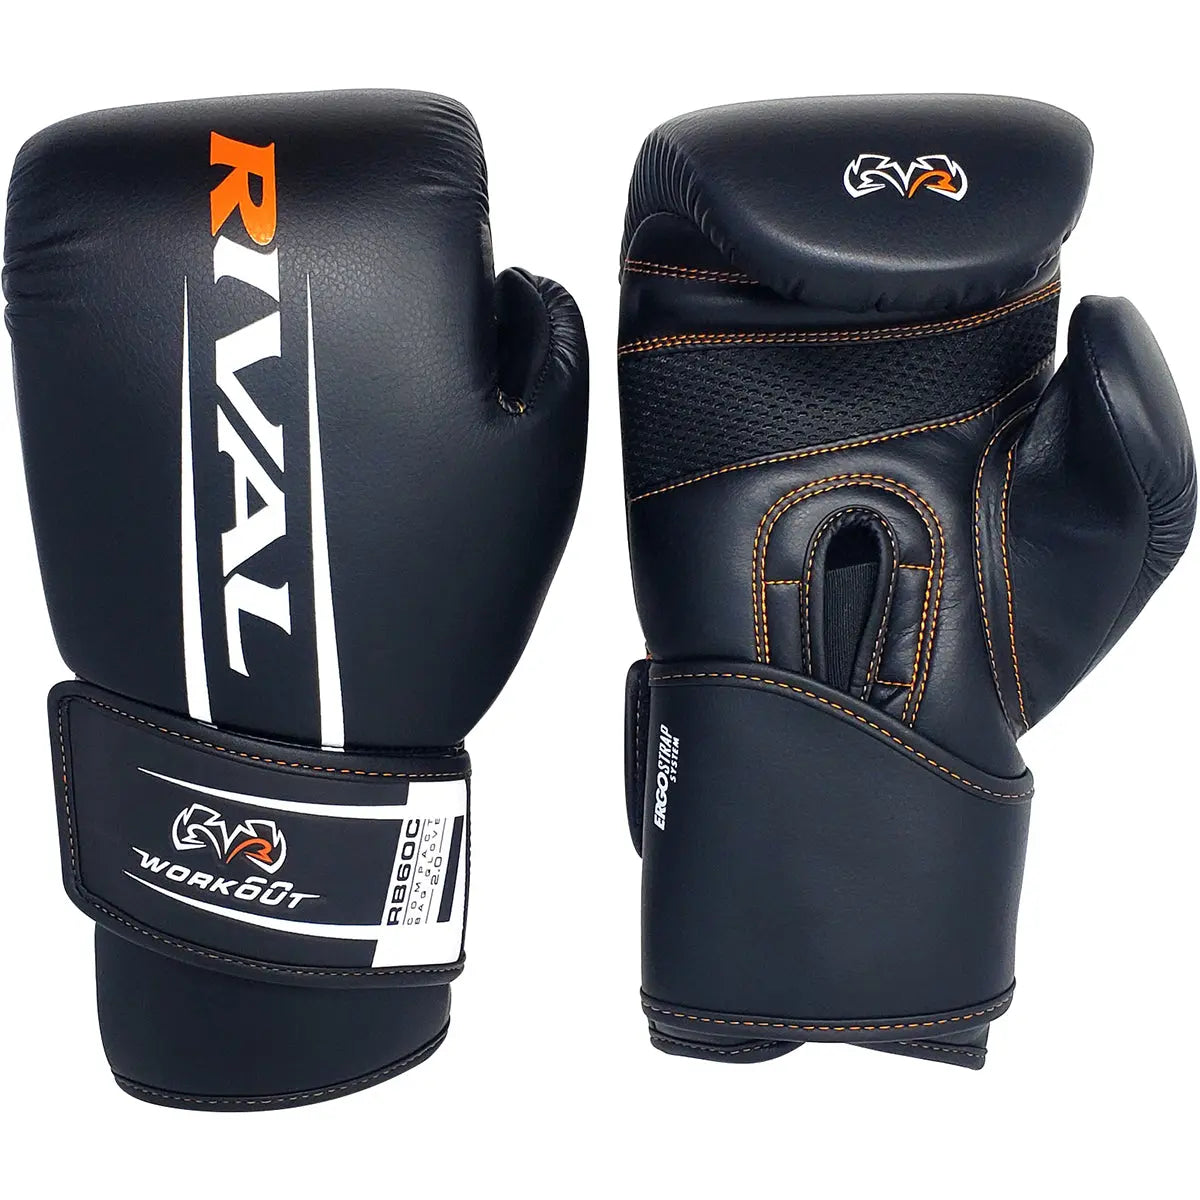 RIVAL Boxing RB60C Workout Compact Hook and Loop Bag Gloves 2.0 - Black RIVAL